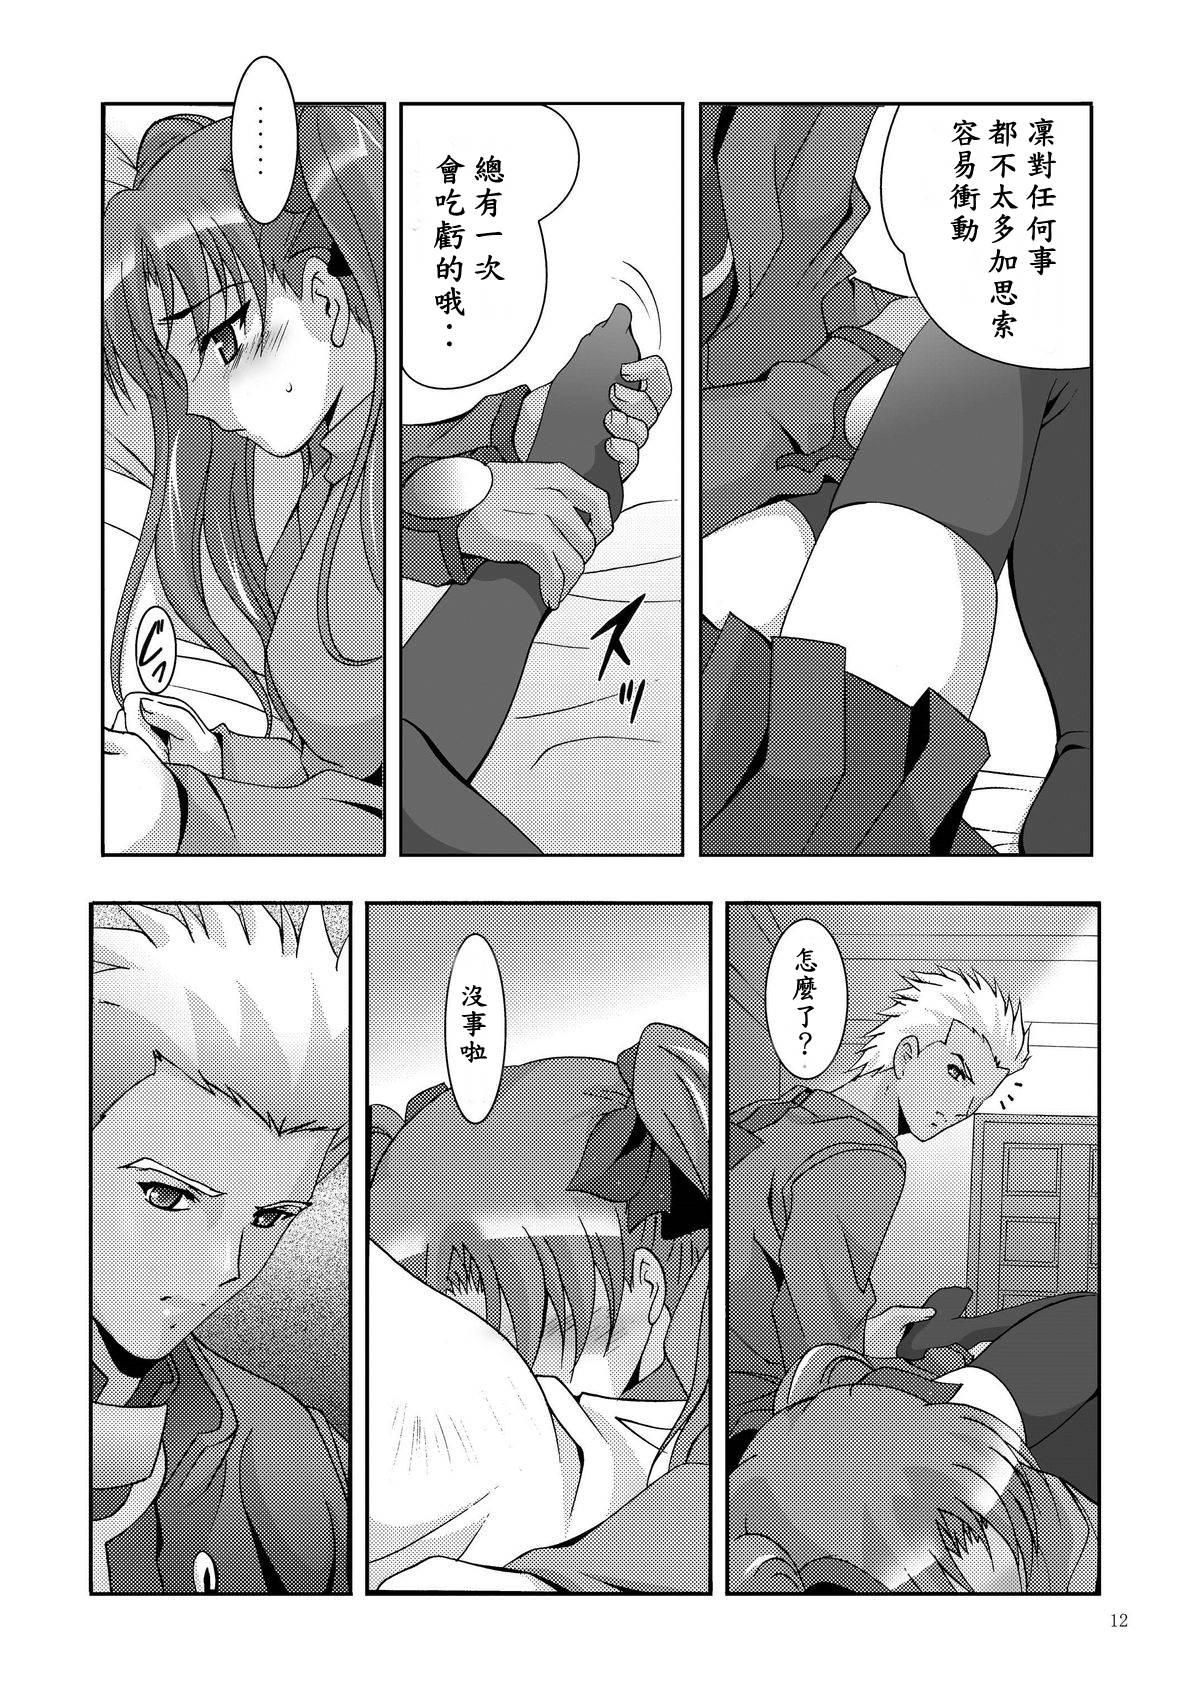 Casada MOUSOU THEATER 19 - Fate stay night Amateurs Gone Wild - Page 10